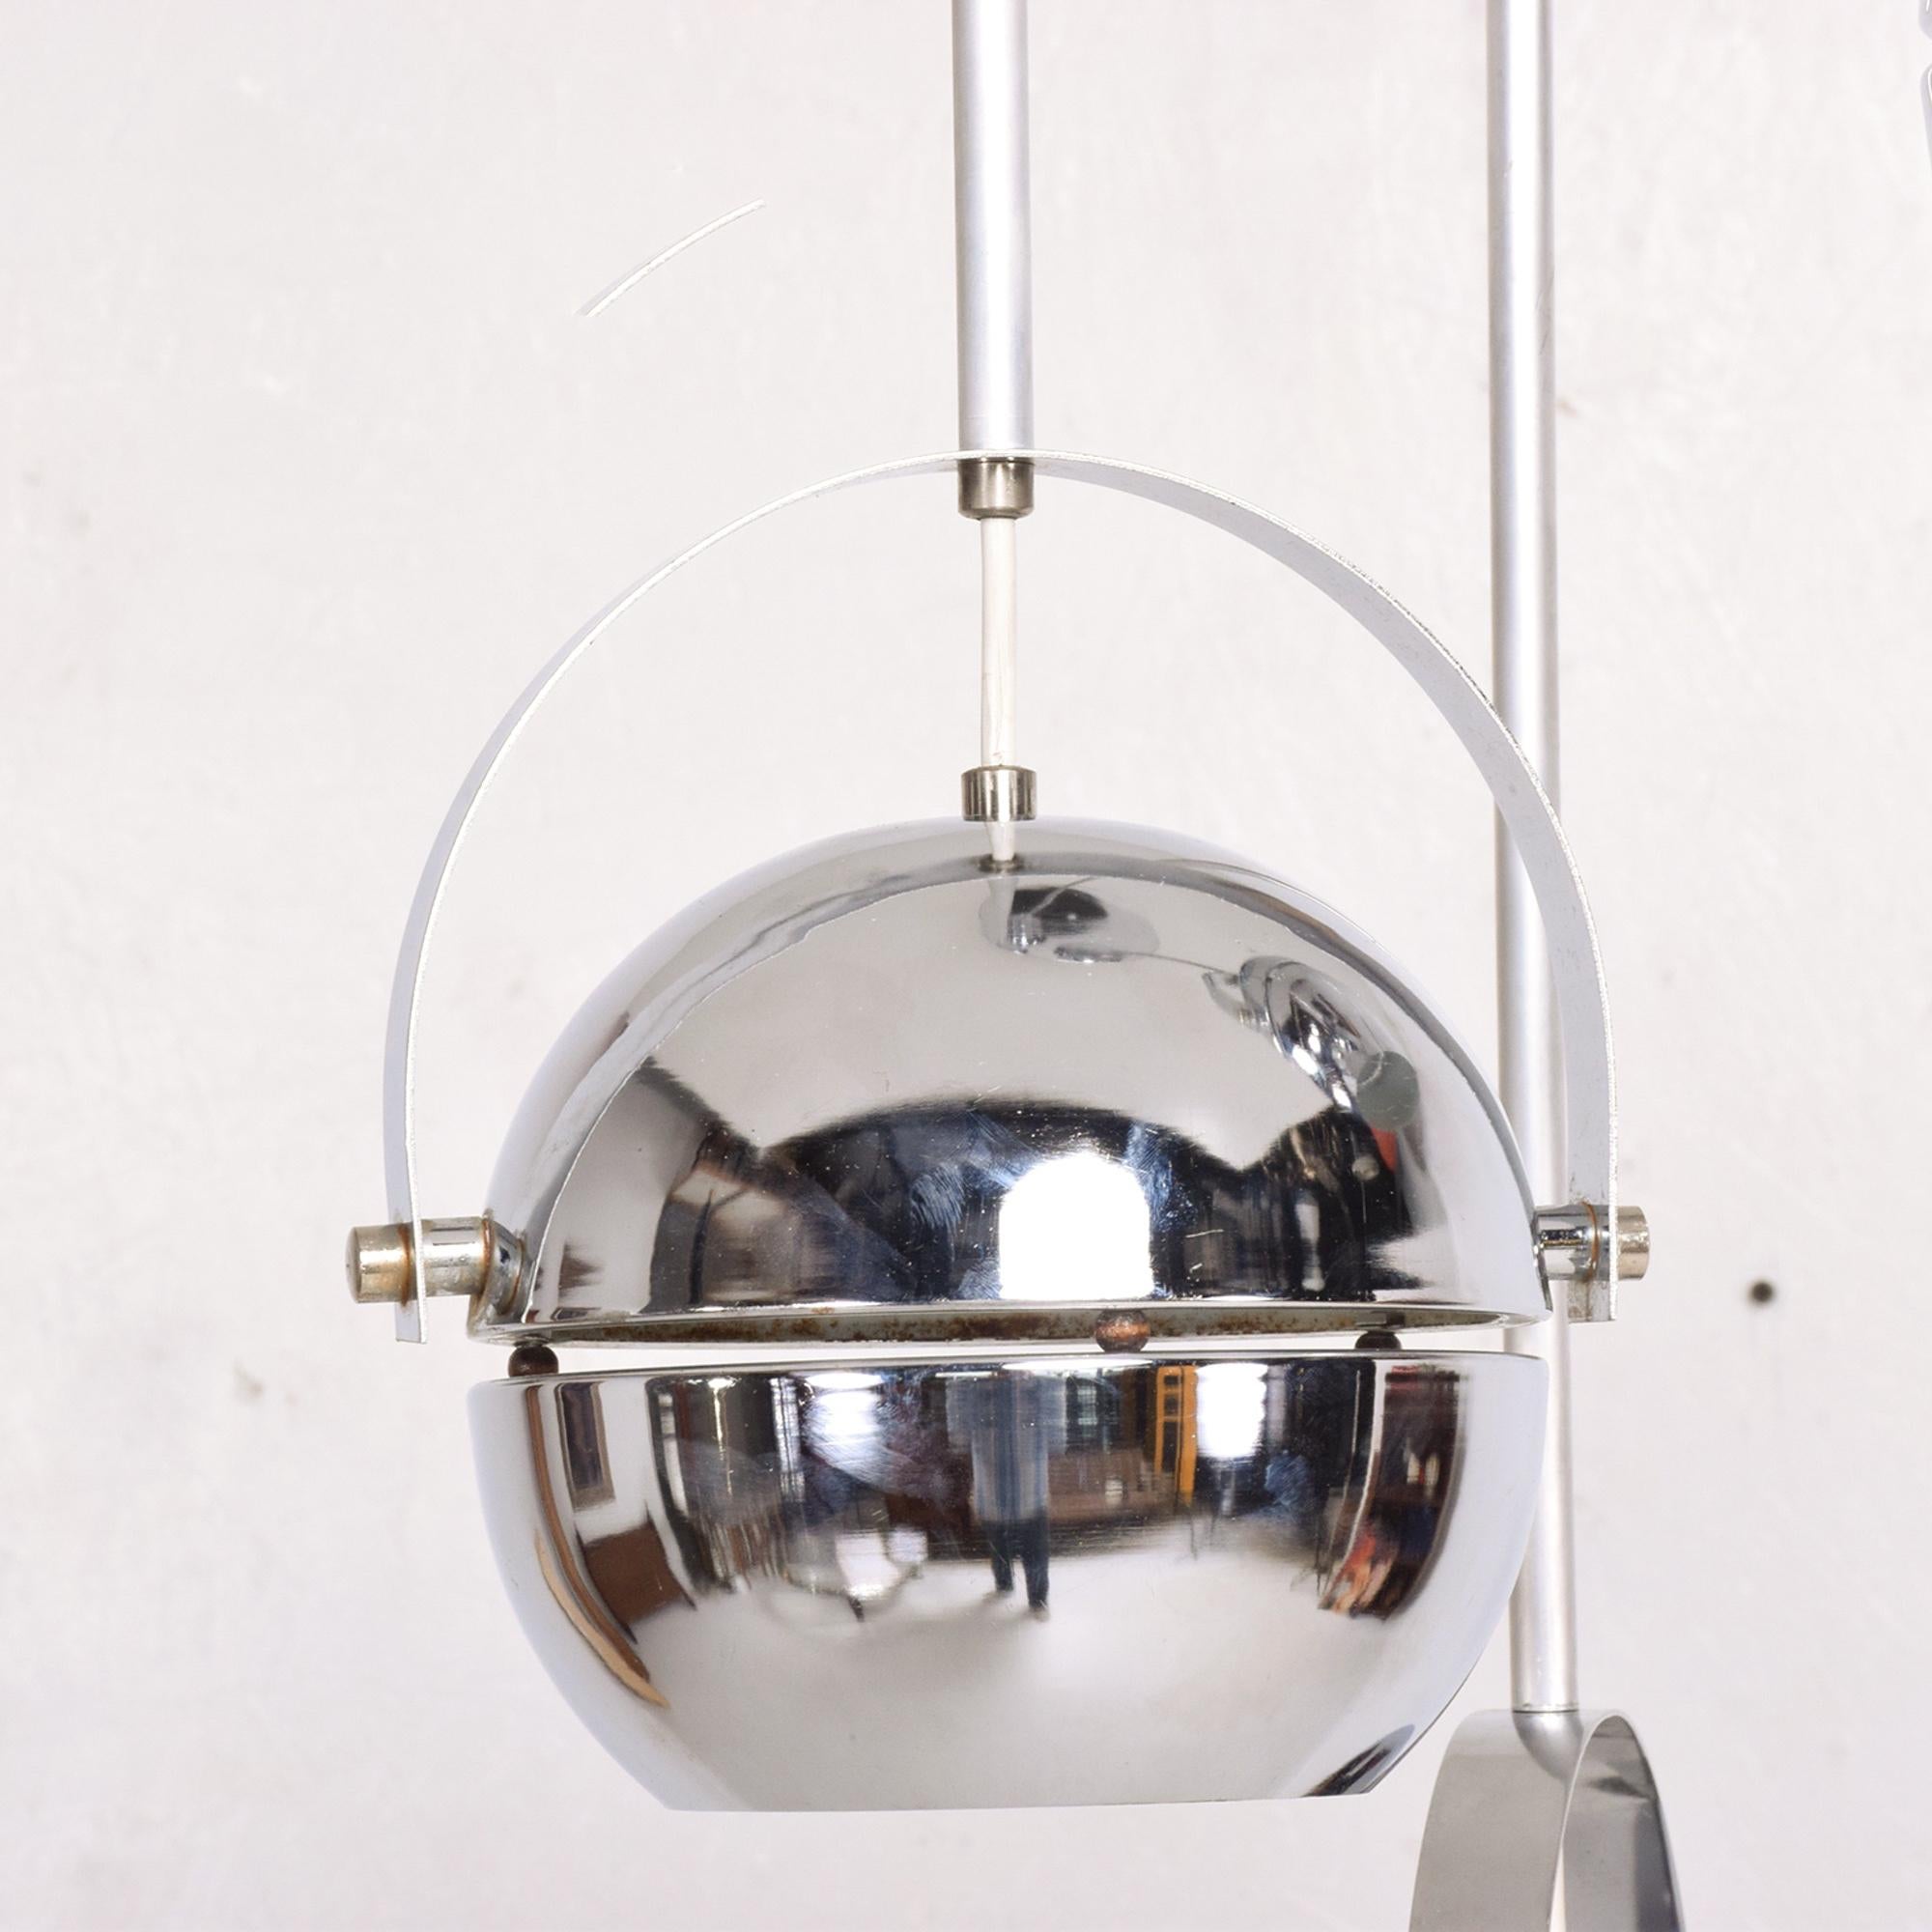 Pendant
Modern Chrome Plated Lamp 3 Dangling Chrome Globes Pendant Hanging Light 1960s
Each sphere is 7 in diameter.
Attributed to Lightolier. Chandelier is in Italian Torino style. Unmarked.
40Tall x 19 Diameter
Very good original unrestored